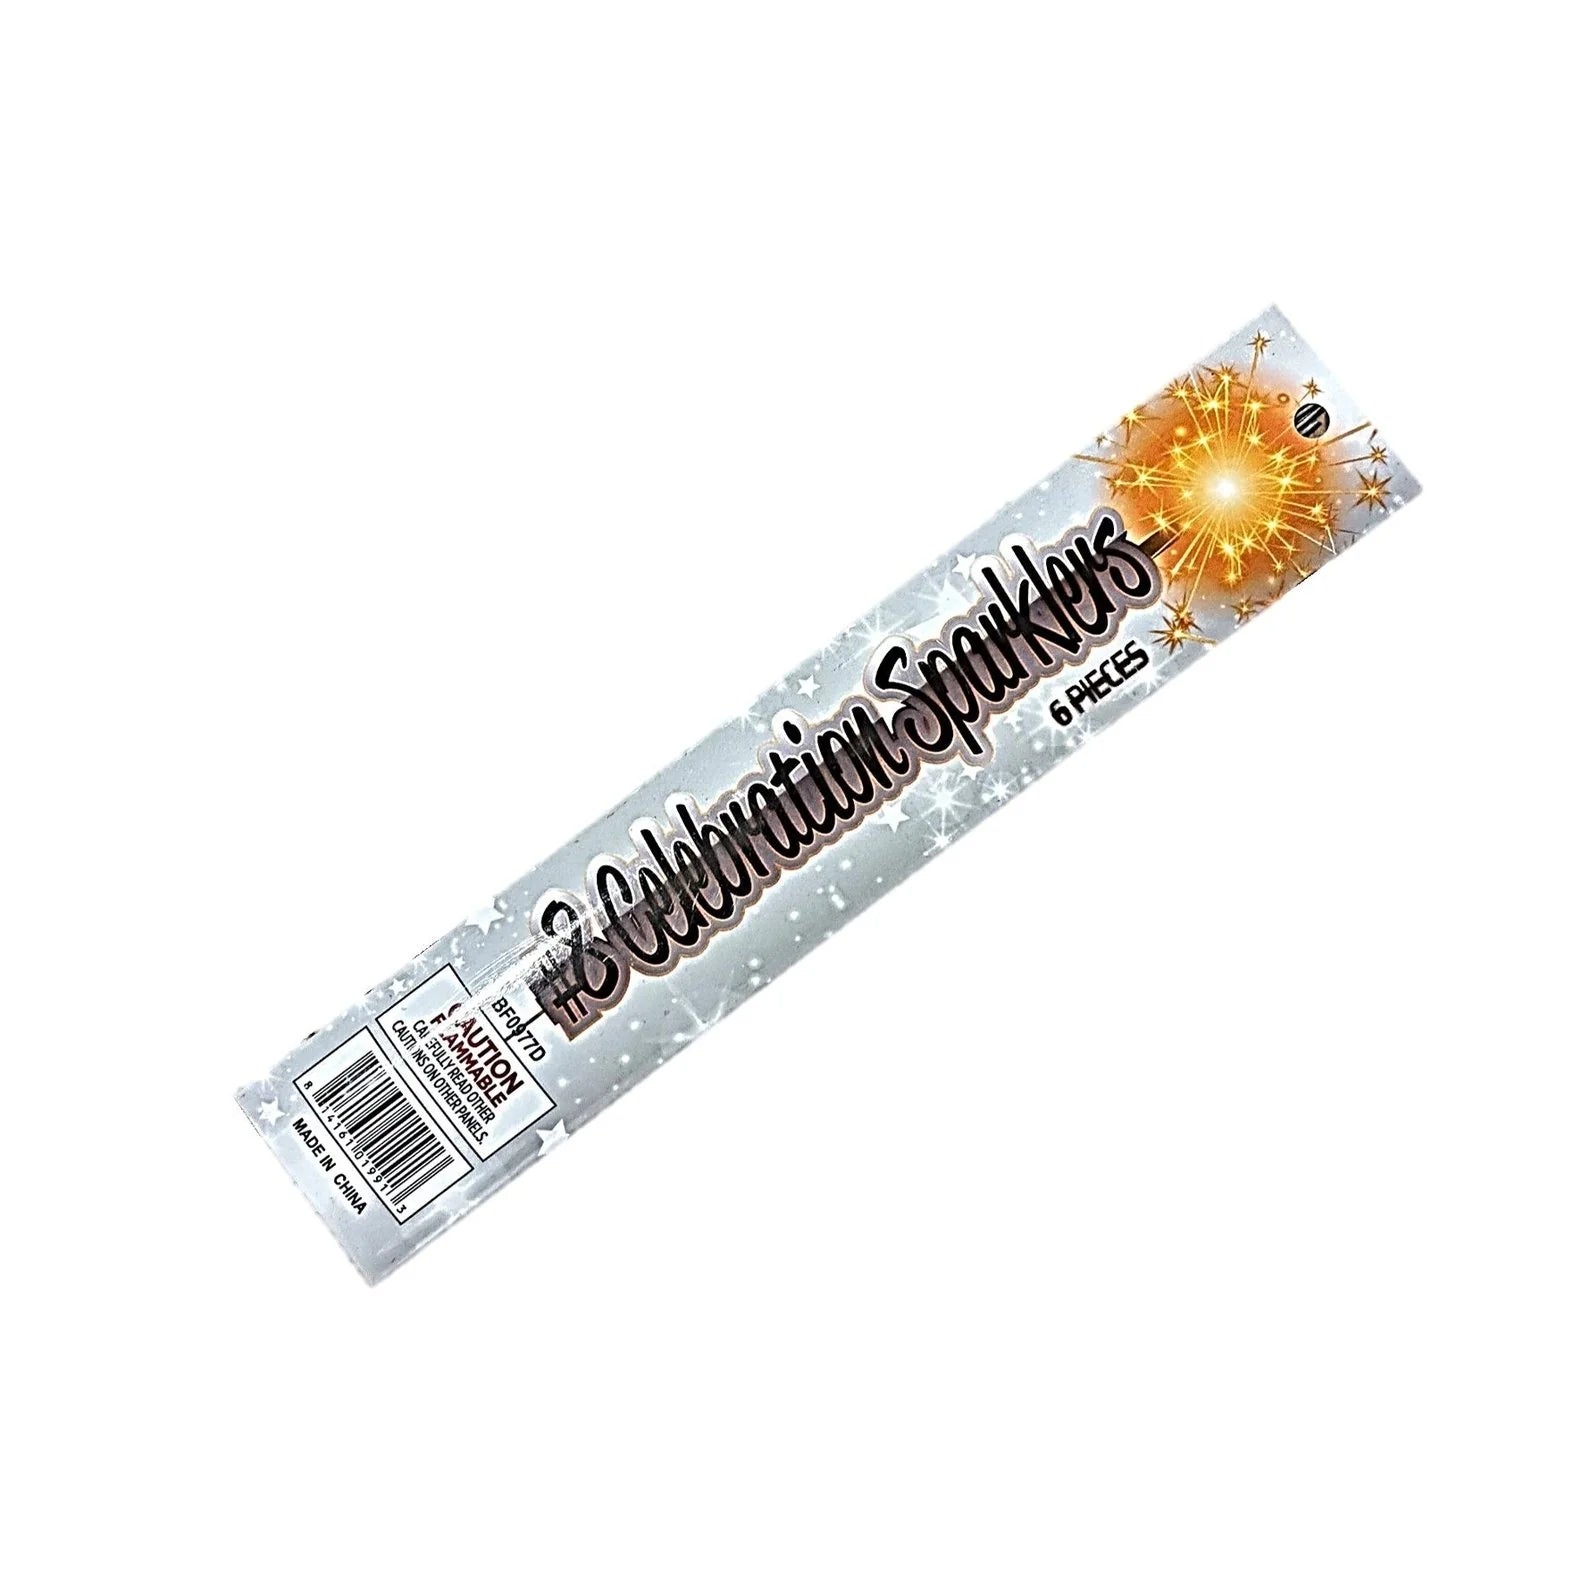 300 Piece 8 Inch Gold Sparklers - 50 Packs of 6 Sparklers